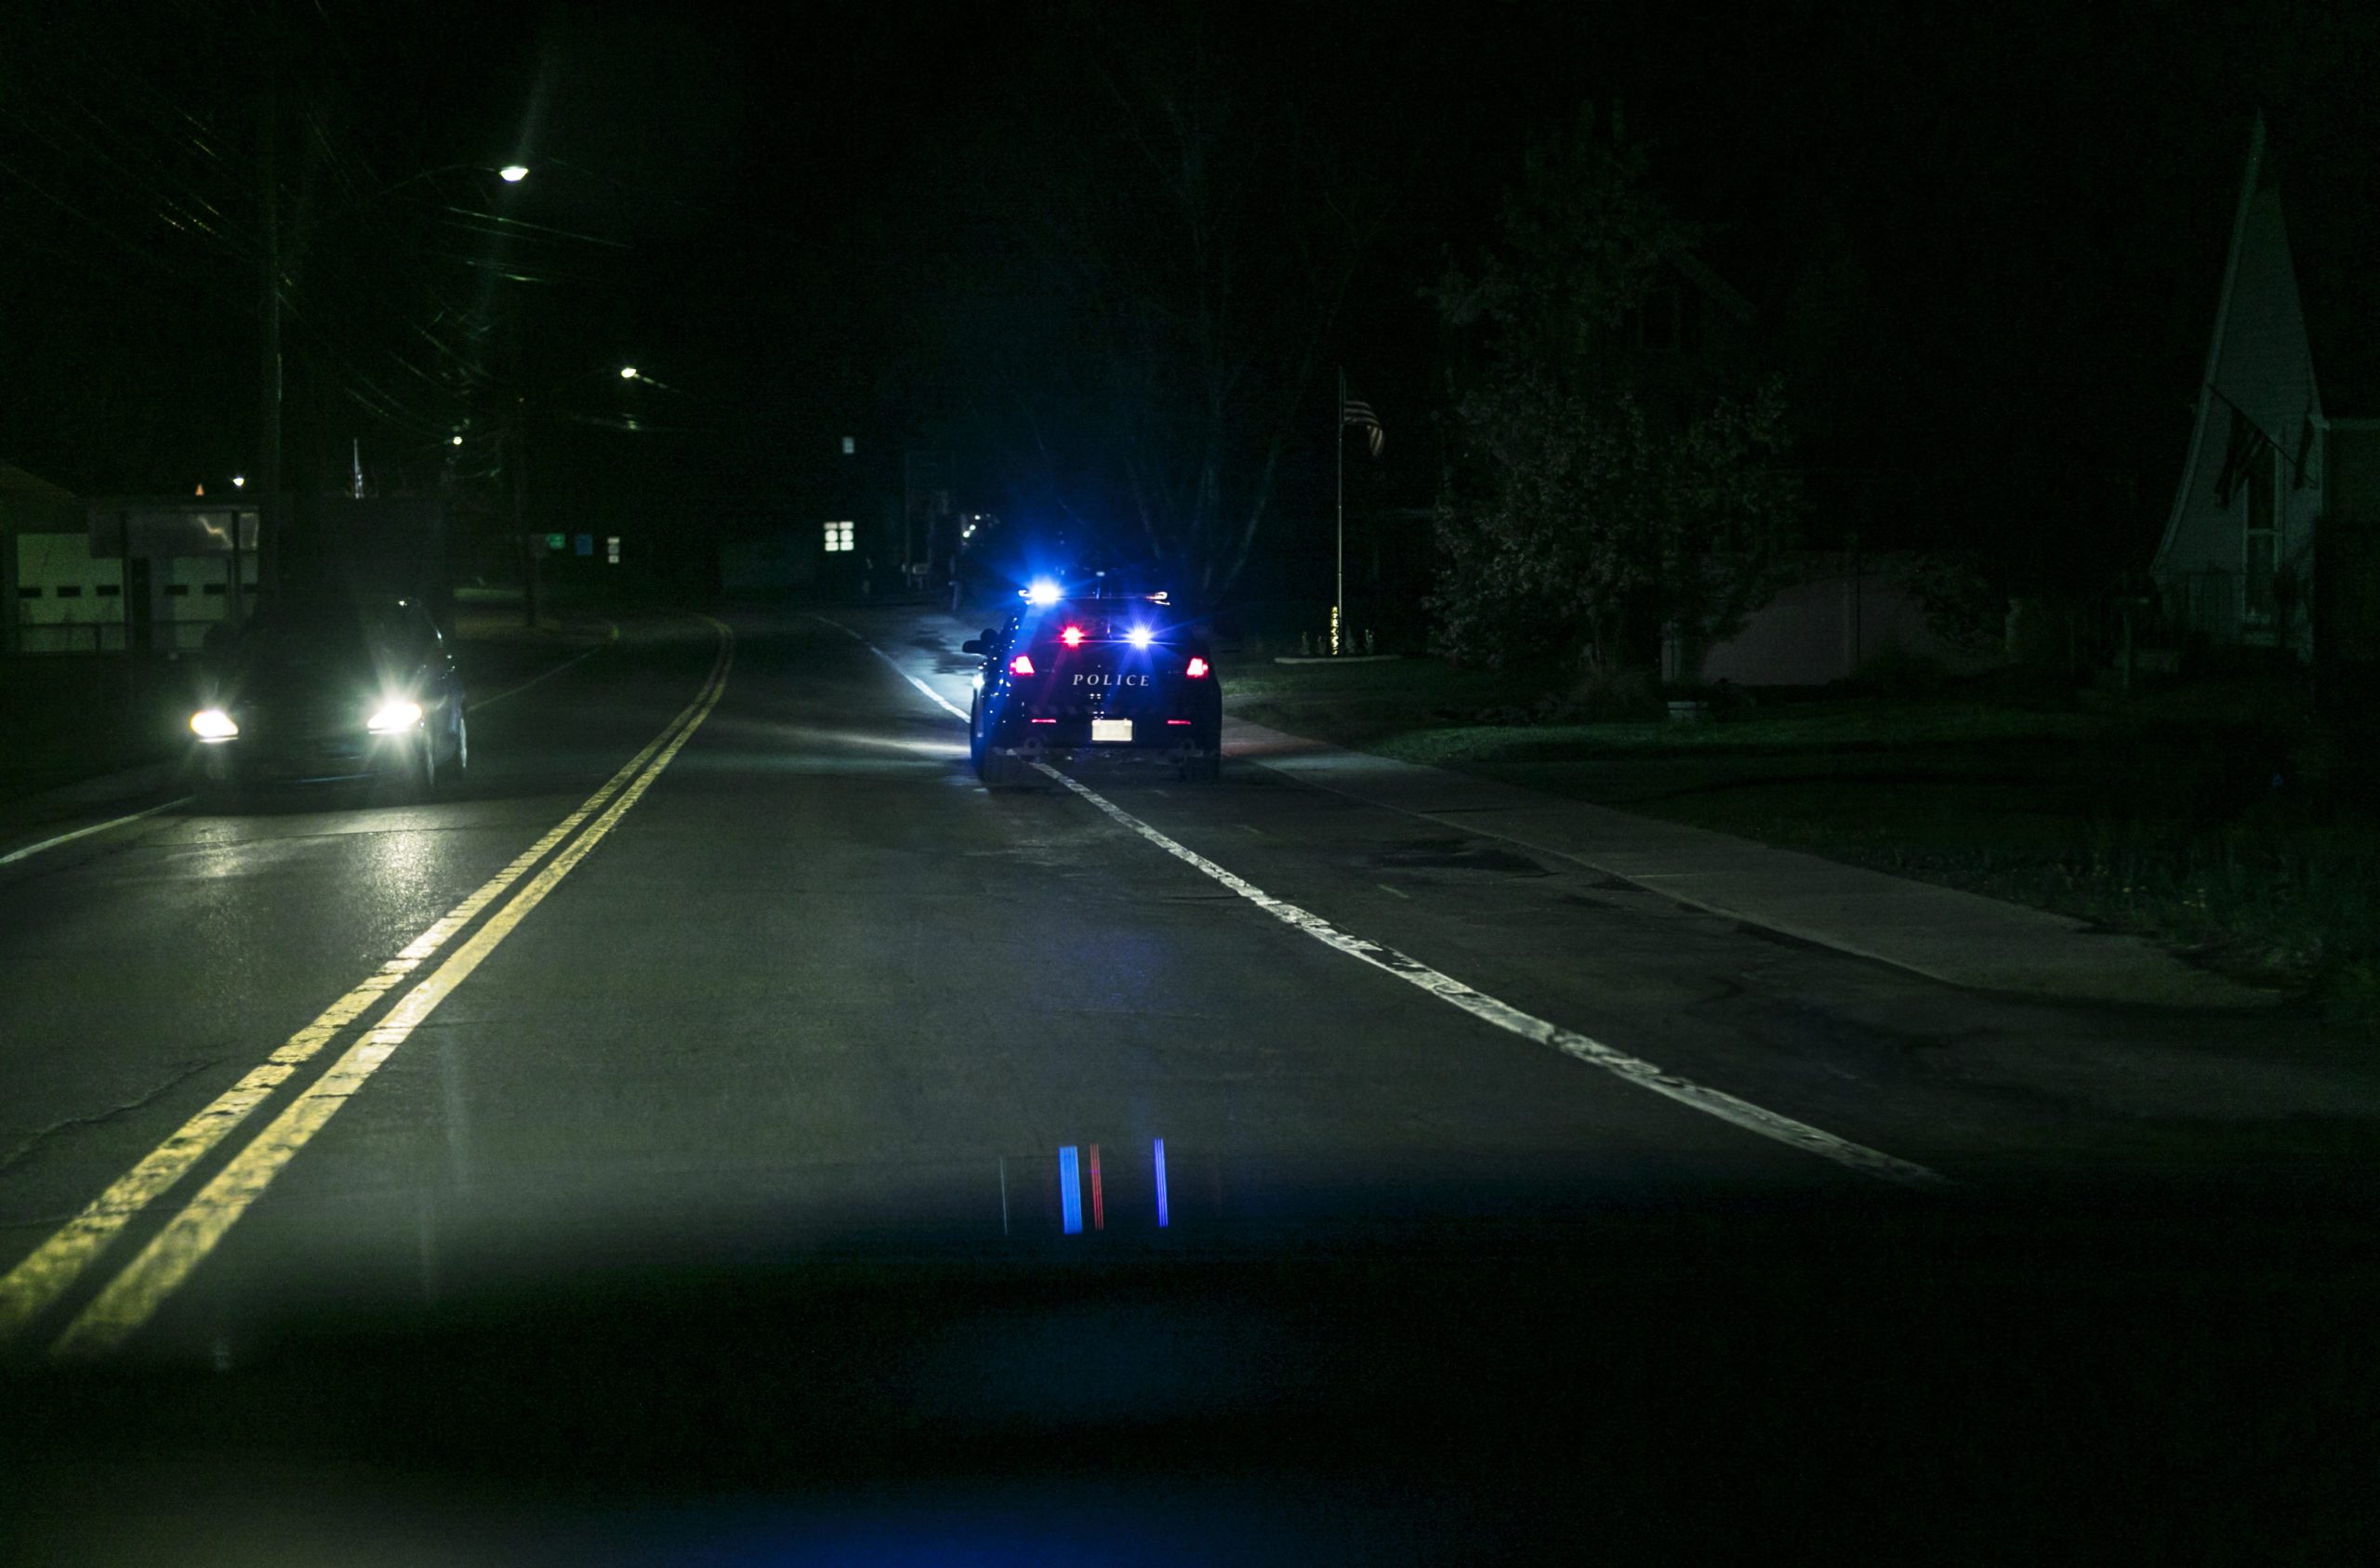 Roadside Car Pulled Over by Police at Night